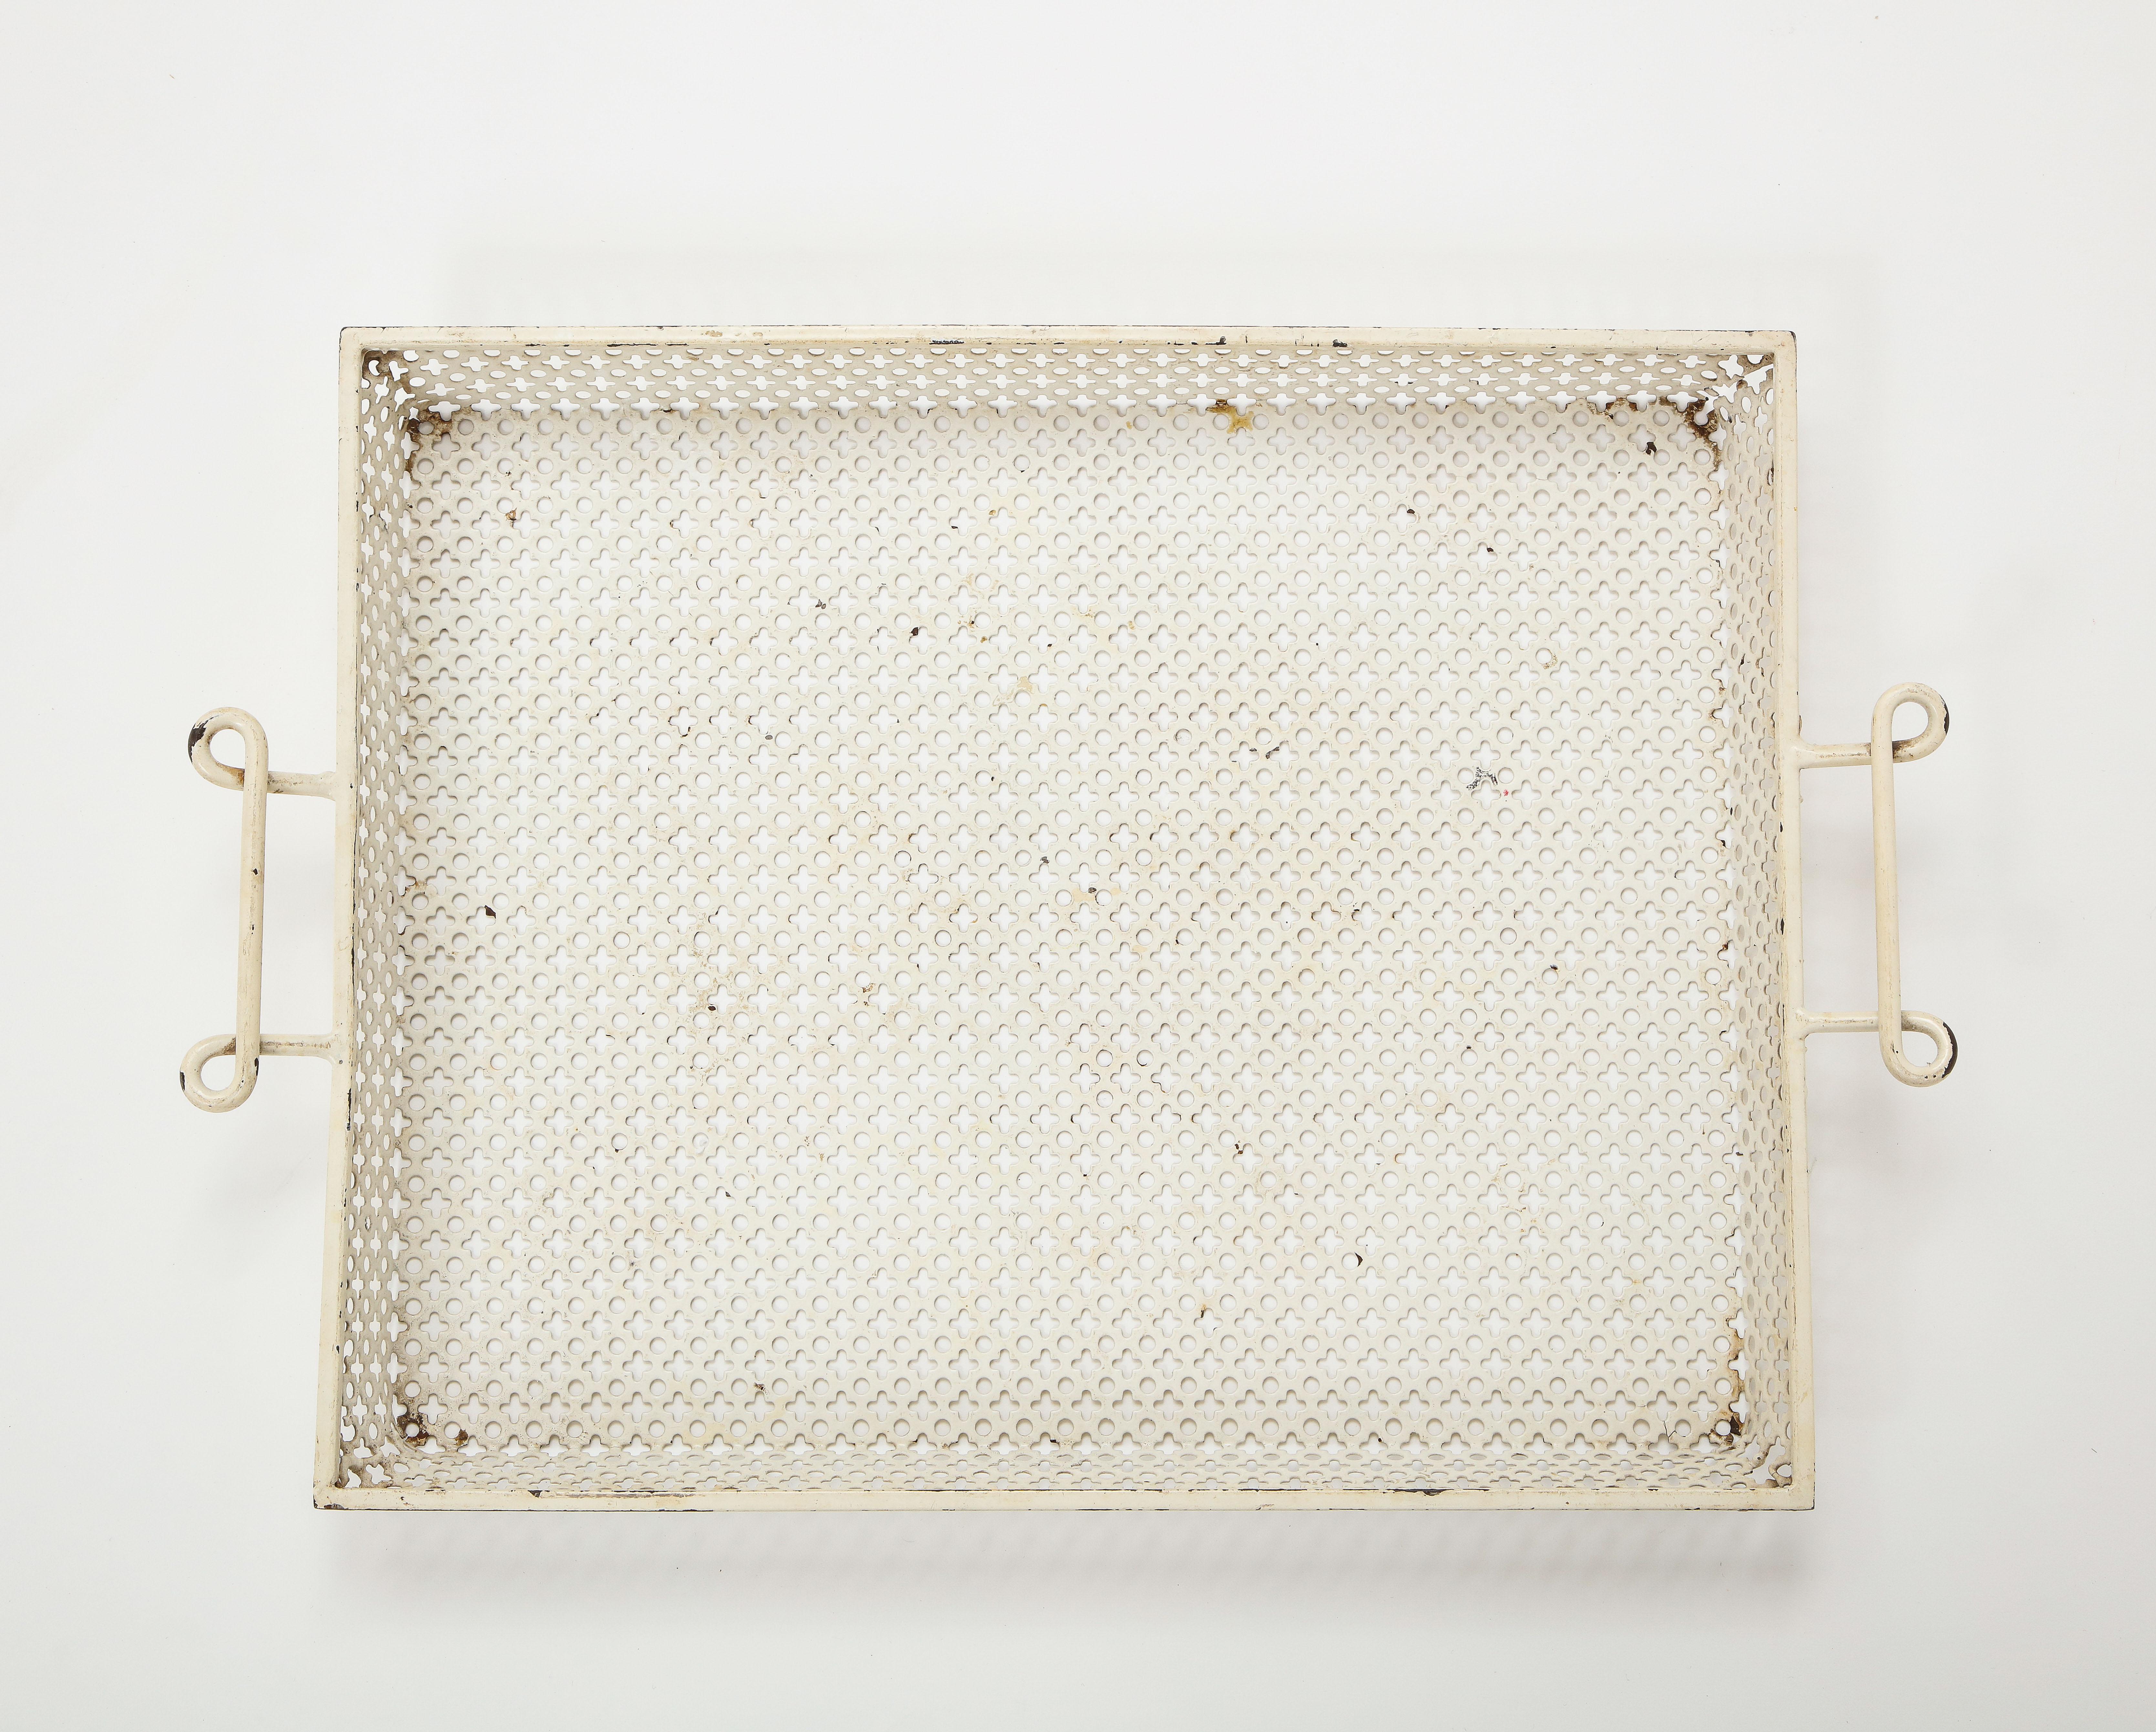 Mathieu Mategot (1910-2001),white lacquer clover perforated serving tray, France, c. 1950
Metal, (not repainted, excellent condition, rare handle)
H: 1.75 W: 13.75 L: 16.5 (w/ handles 19.75) in.

Bibliography: Patrick Favardin, Mathieu Matégot,